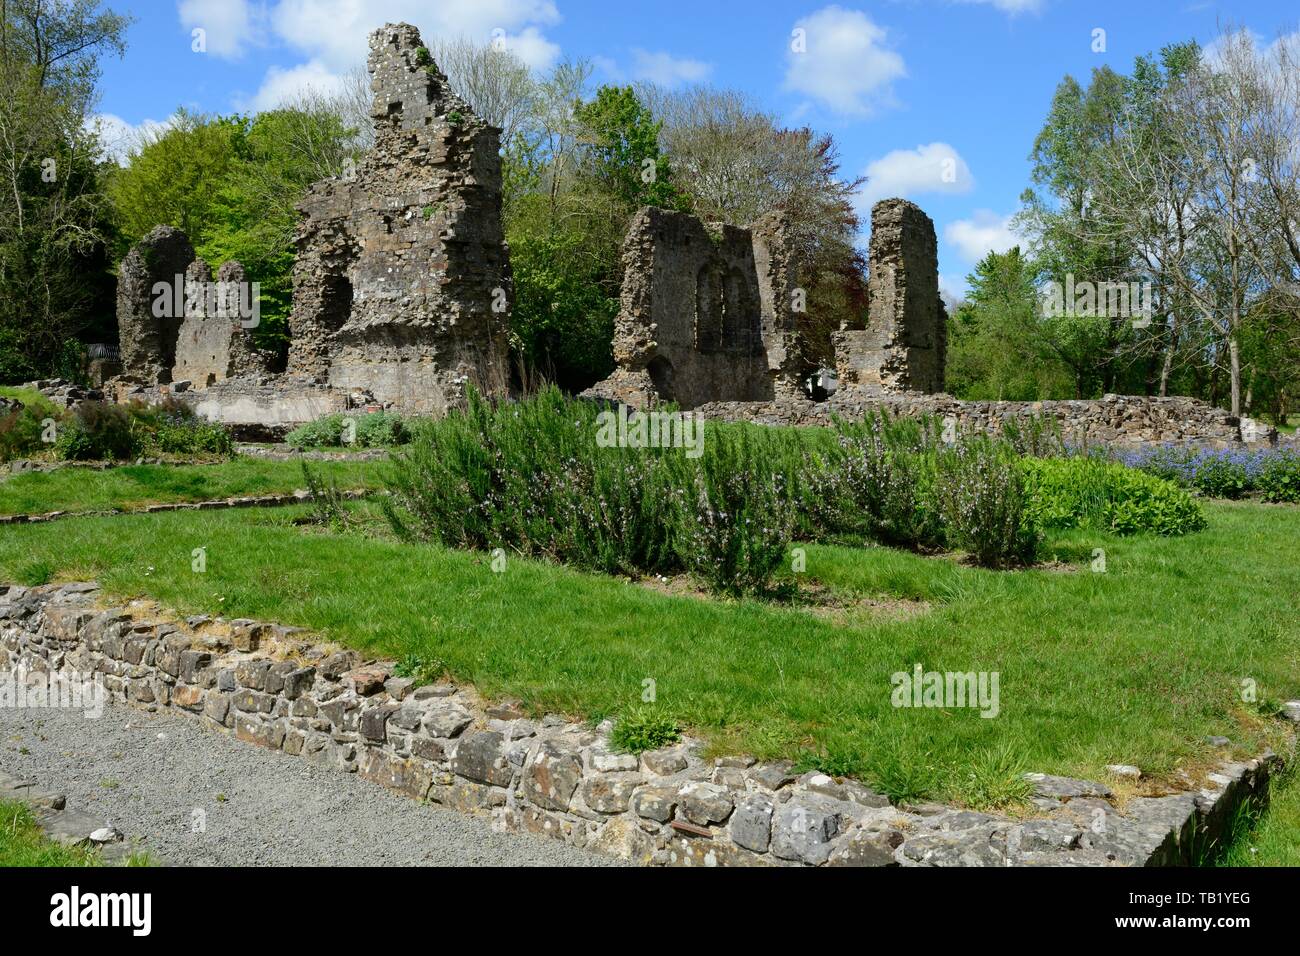 Haverfordwest Priory early 13th century Augustinian priory with the only remaining ecclesiastical medieval garden in Britain Pembrokeshire Wales UK Stock Photo